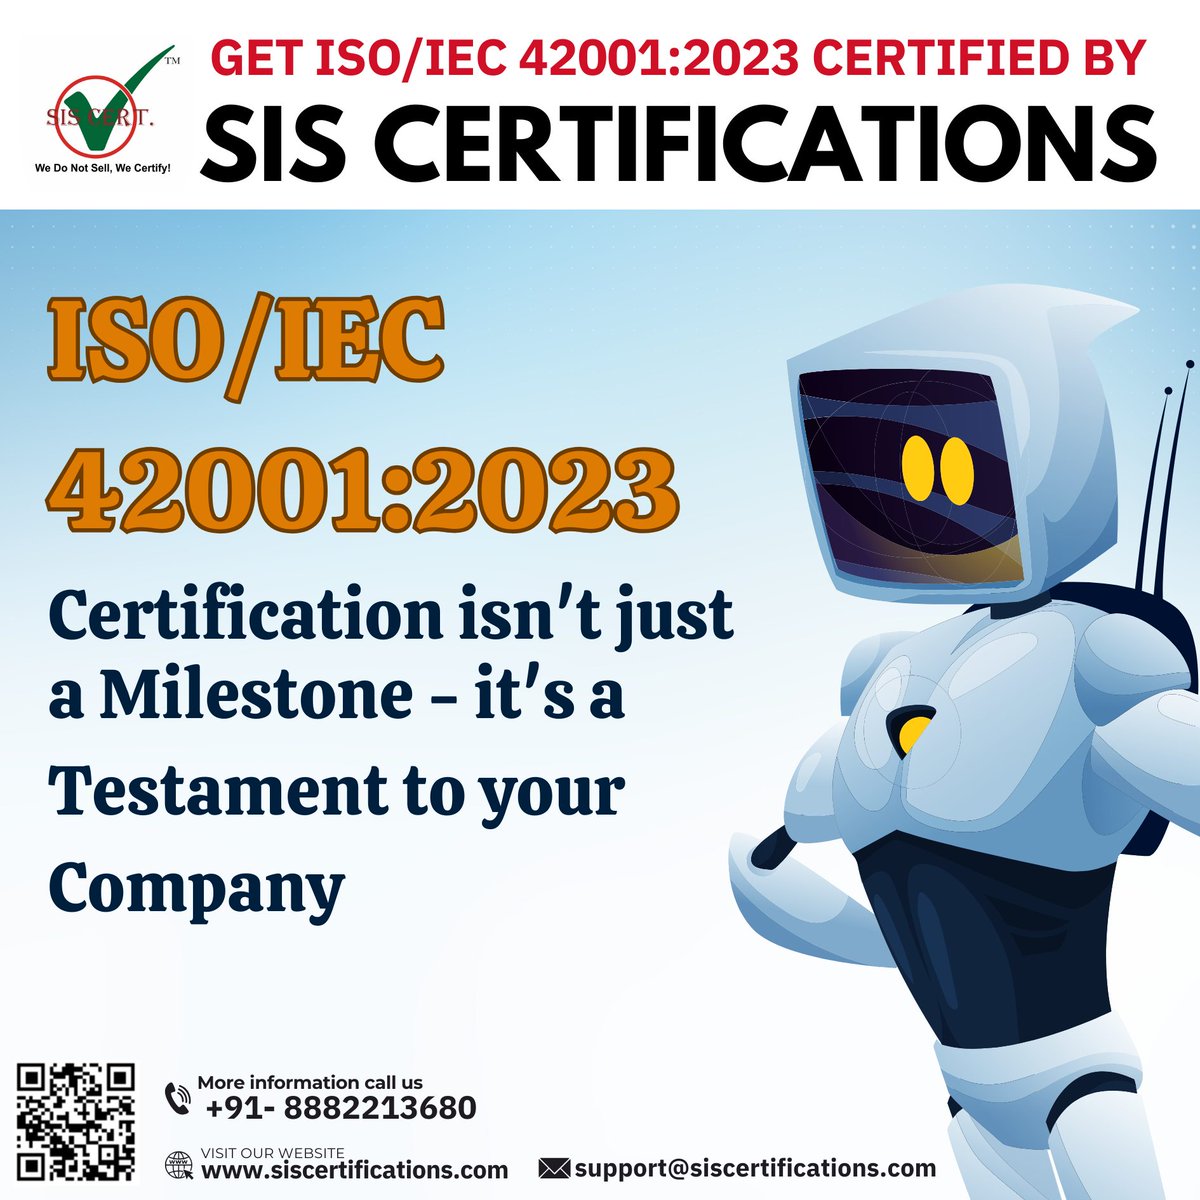 ISO/IEC 42001:2023 for managing AI systems, ensuring transparency, accountability & continuous improvement.
Get ISO/IEC 42001:2023 Certified:- bit.ly/4cYkEuc & give us a call at +91-8882213680 or email us at support@siscertifications.com
#SISCertifications #ai #ISO42001